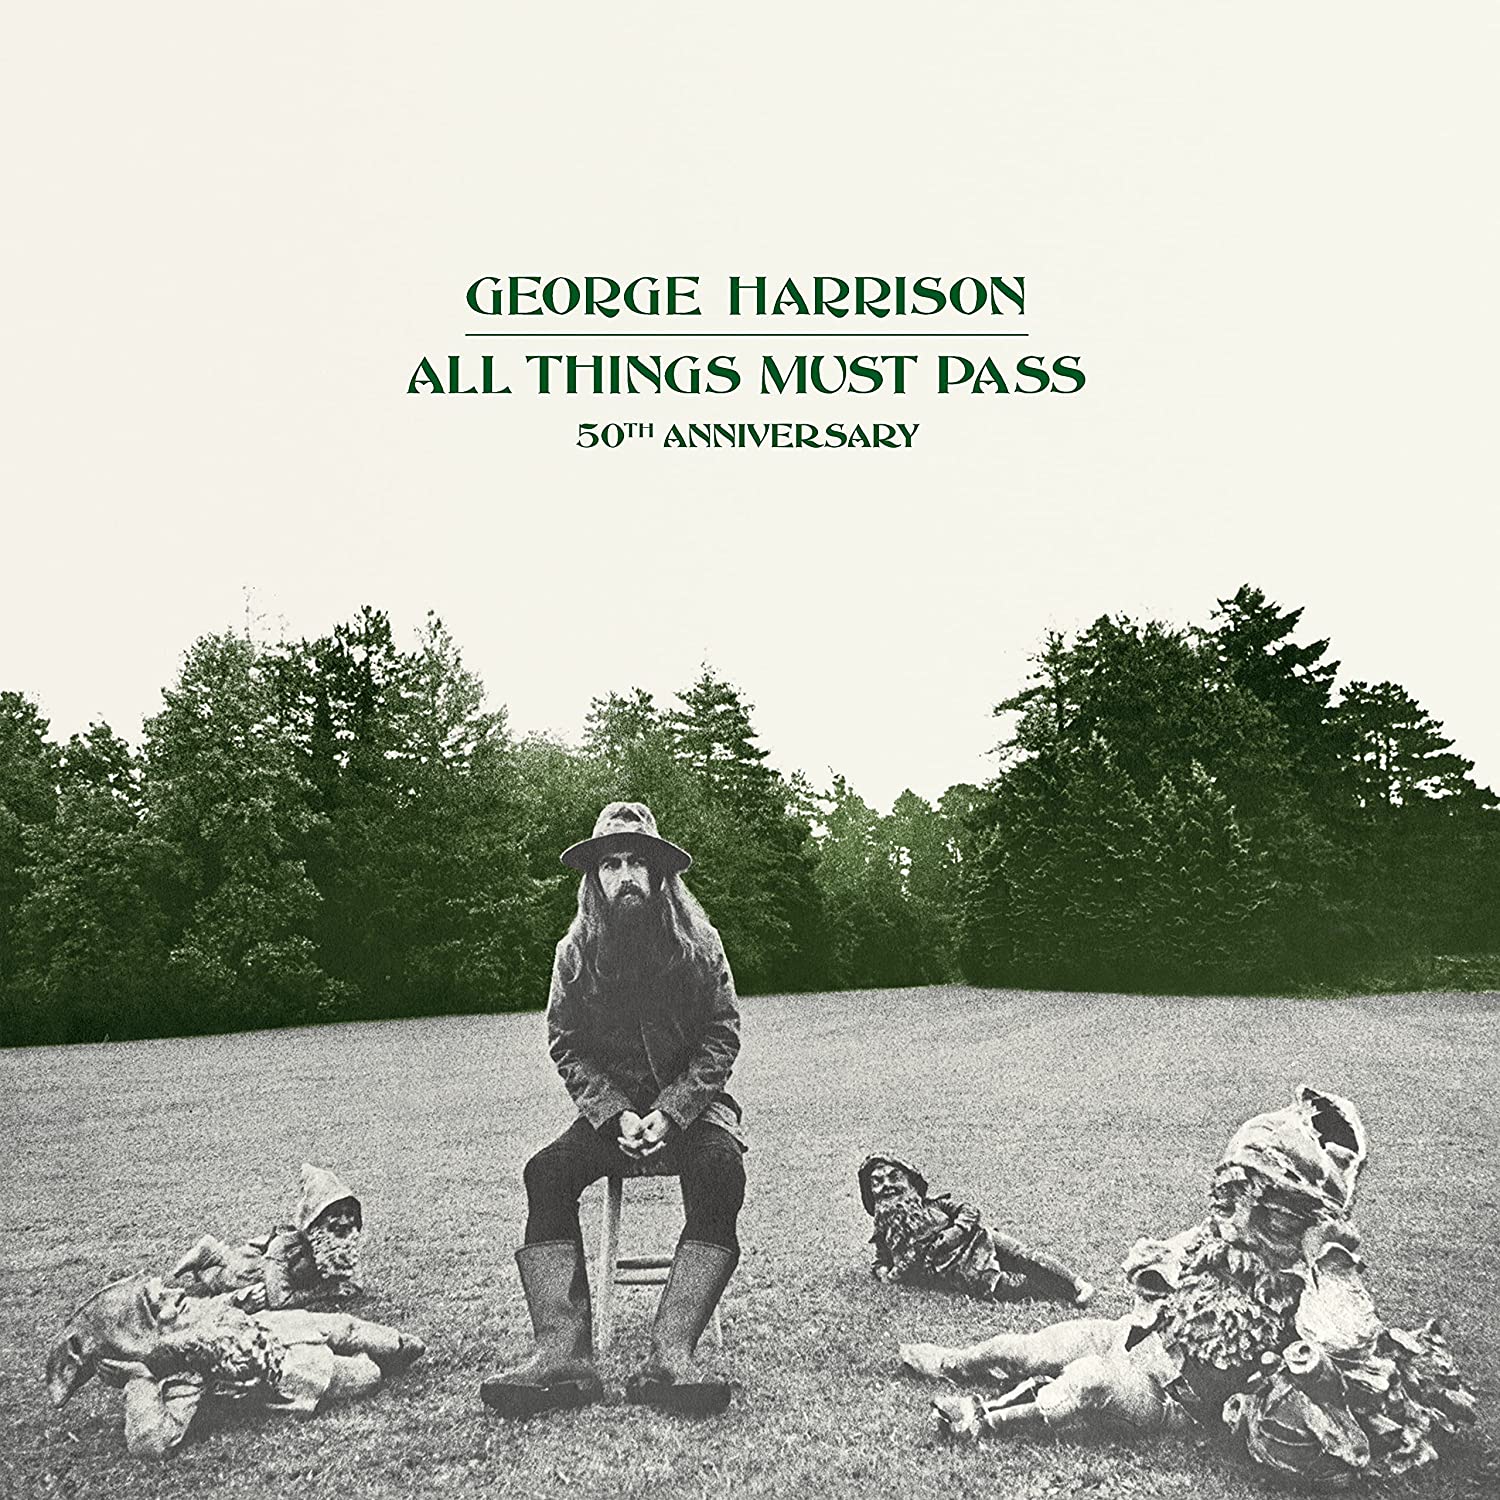 George Harrison / All Things Must Pass 50th anniversary